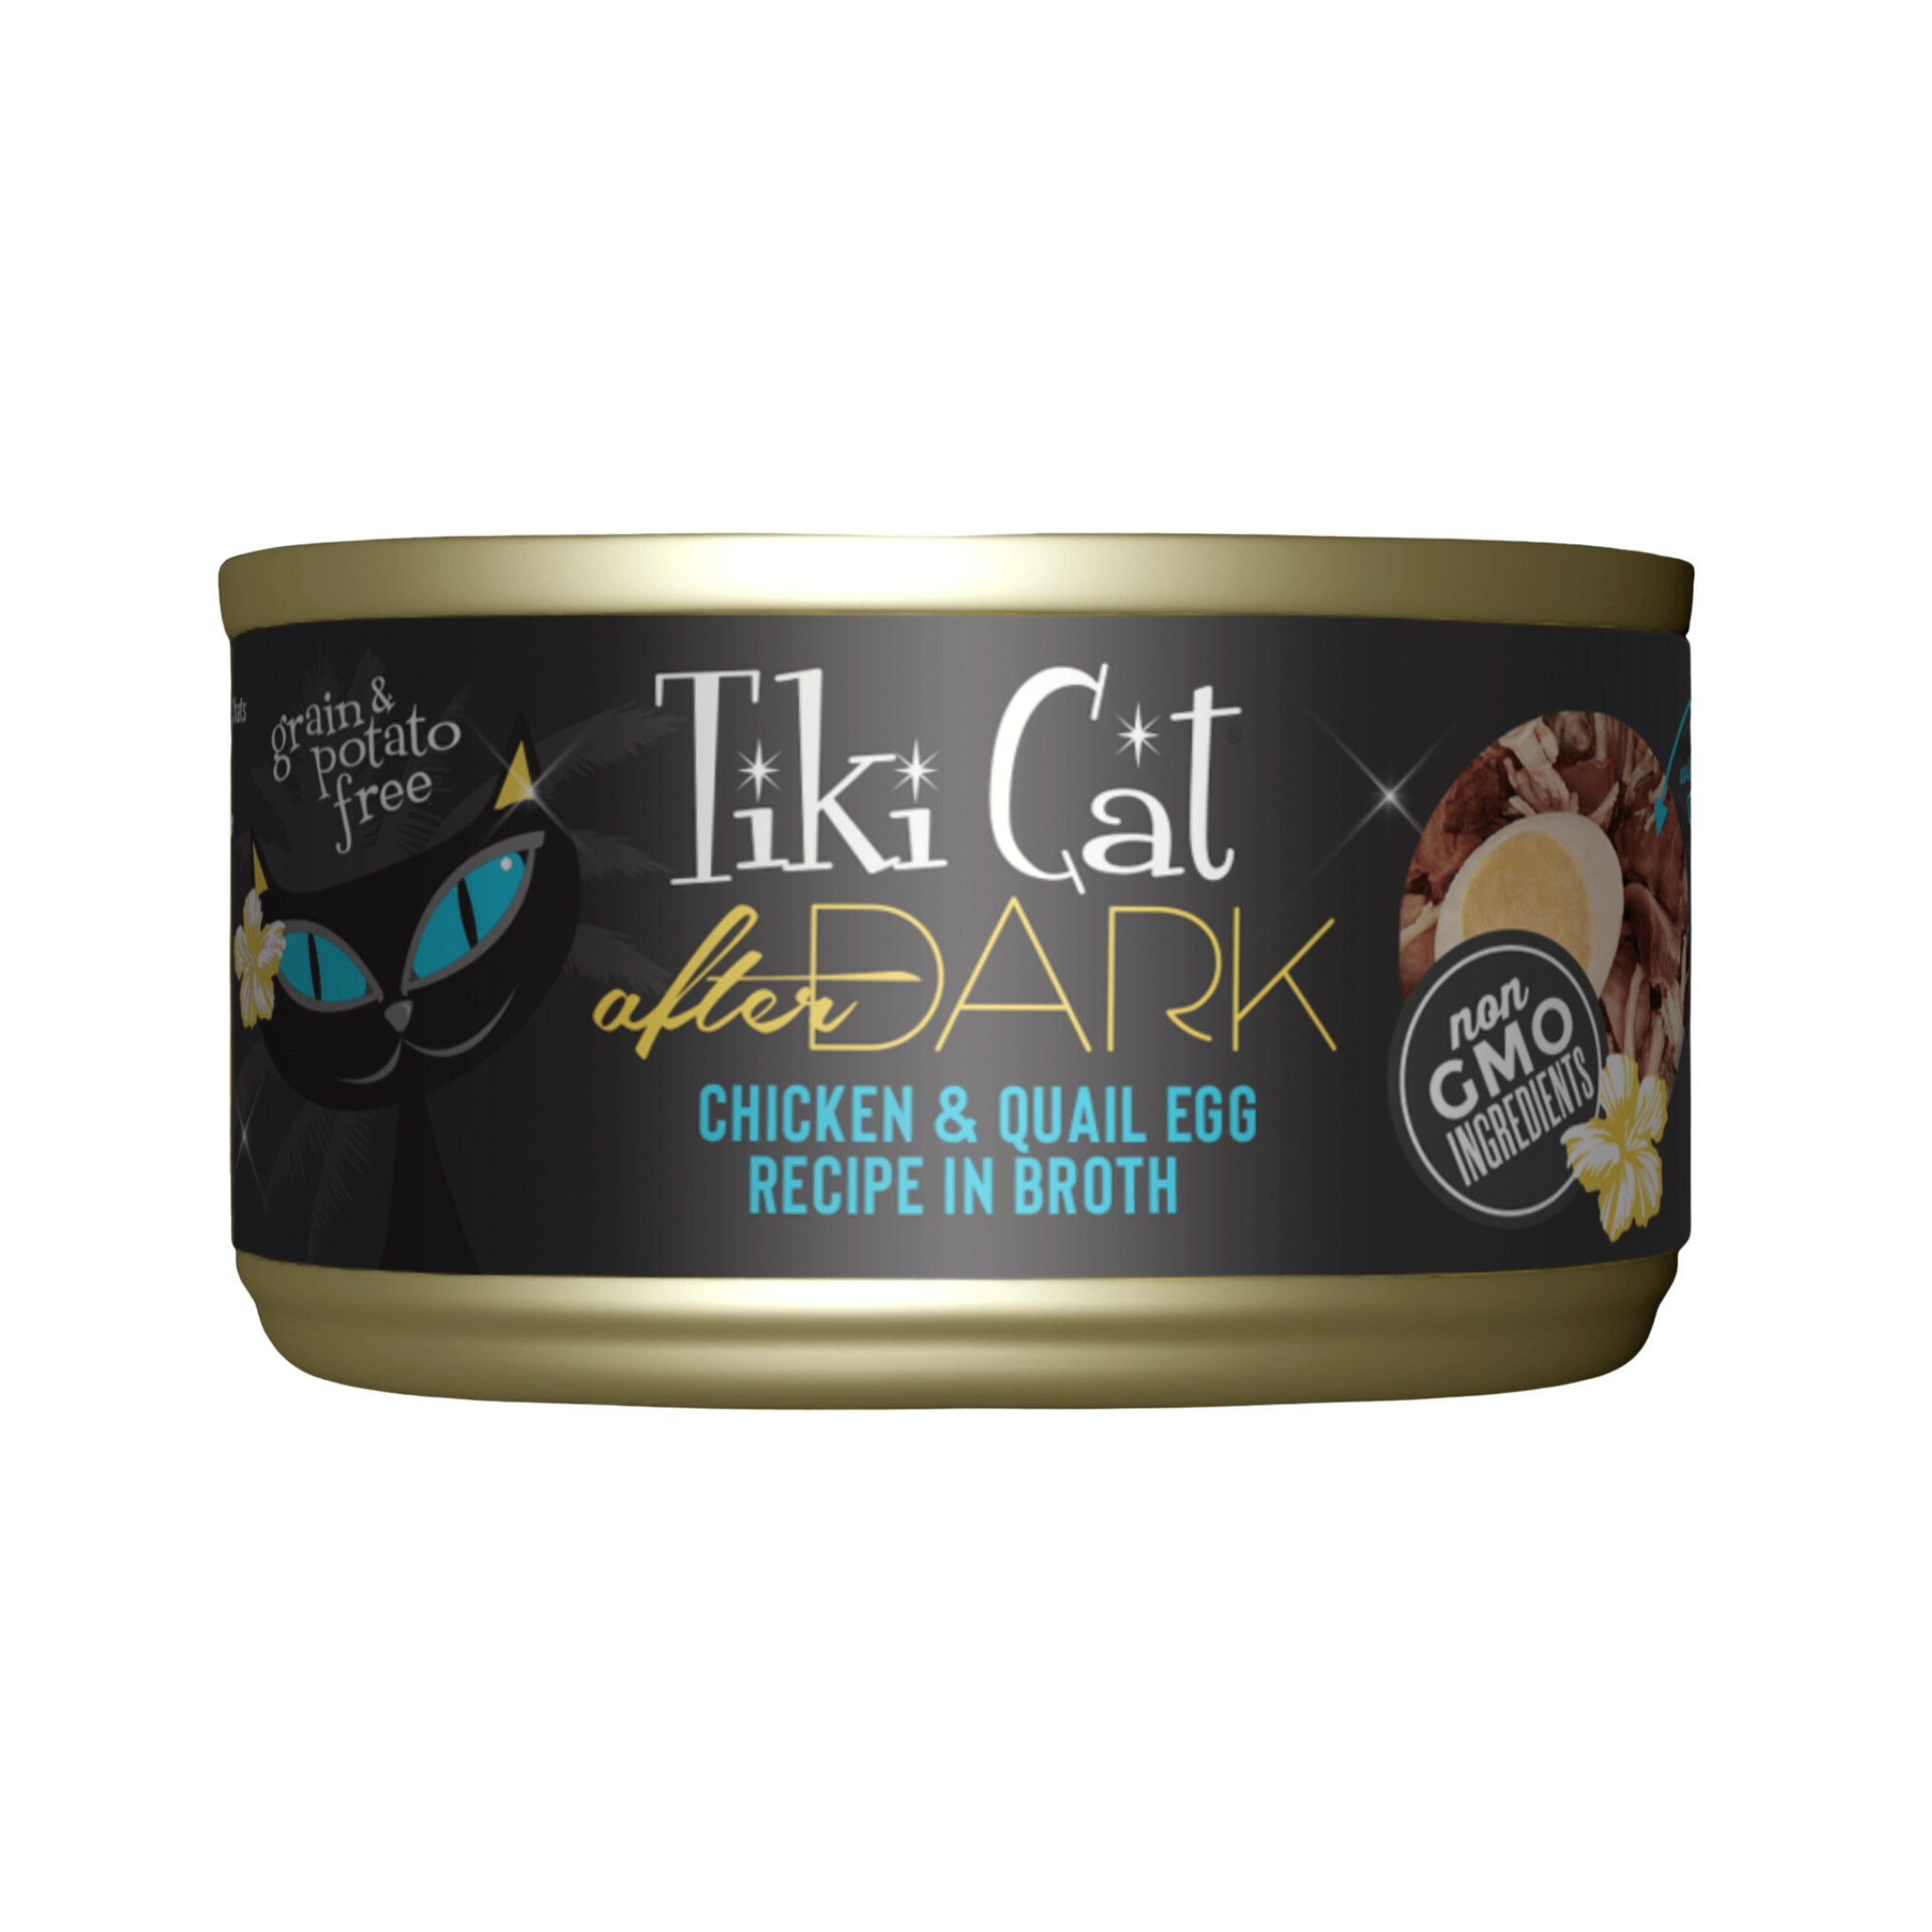 Tiki After Dark Chicken & Quail Egg Cat Canned